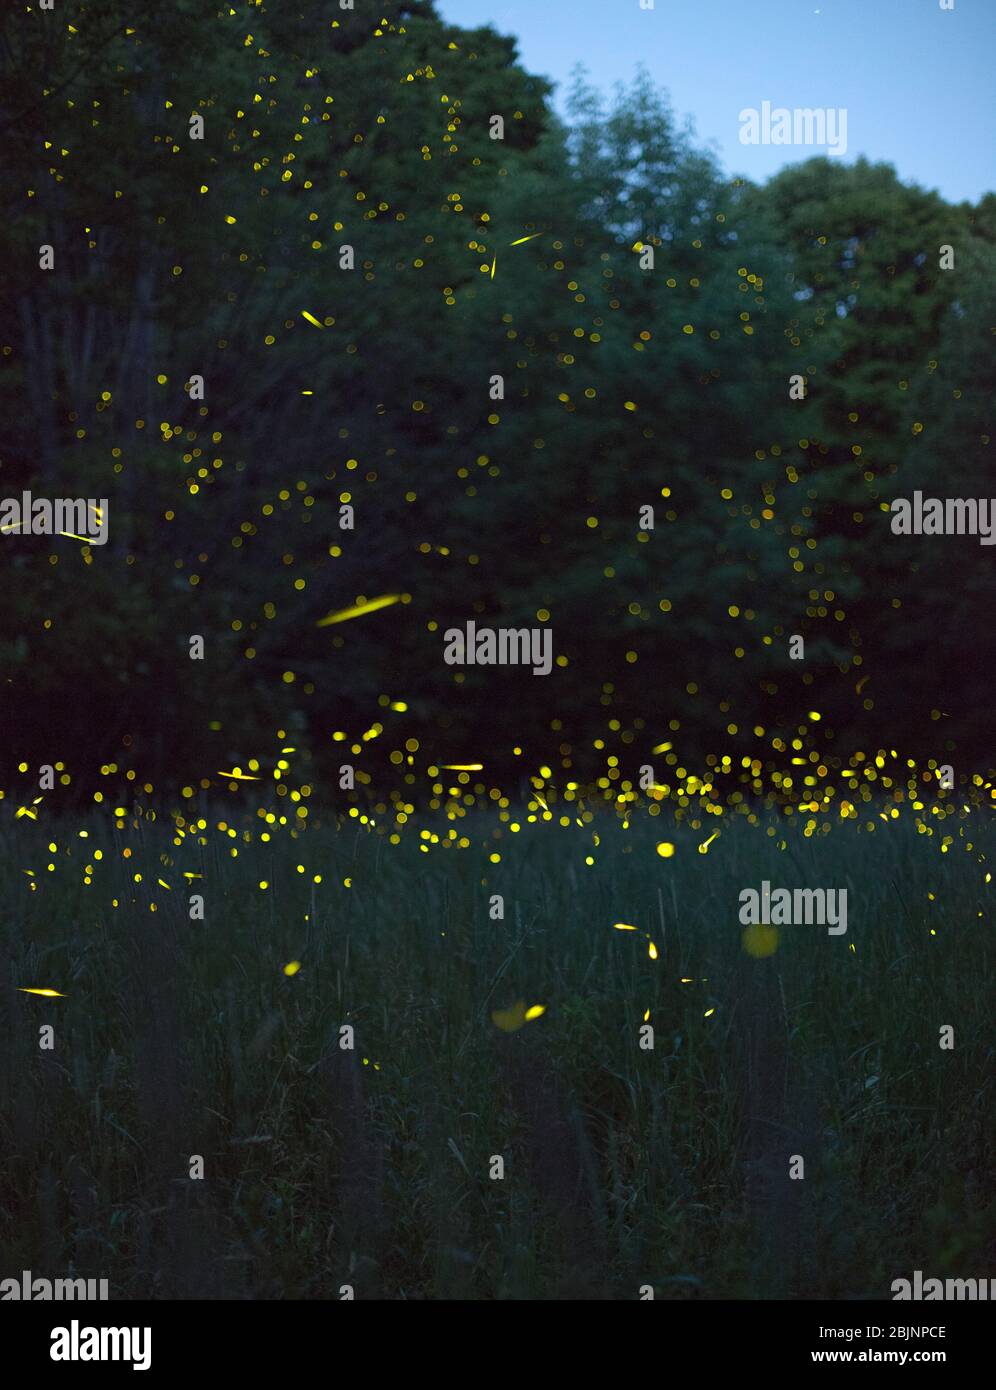 A composite image showing hundreds of fireflies flashing at night in a field, with trees in the background, in upstate New York, Dryden, NY USA Stock Photo